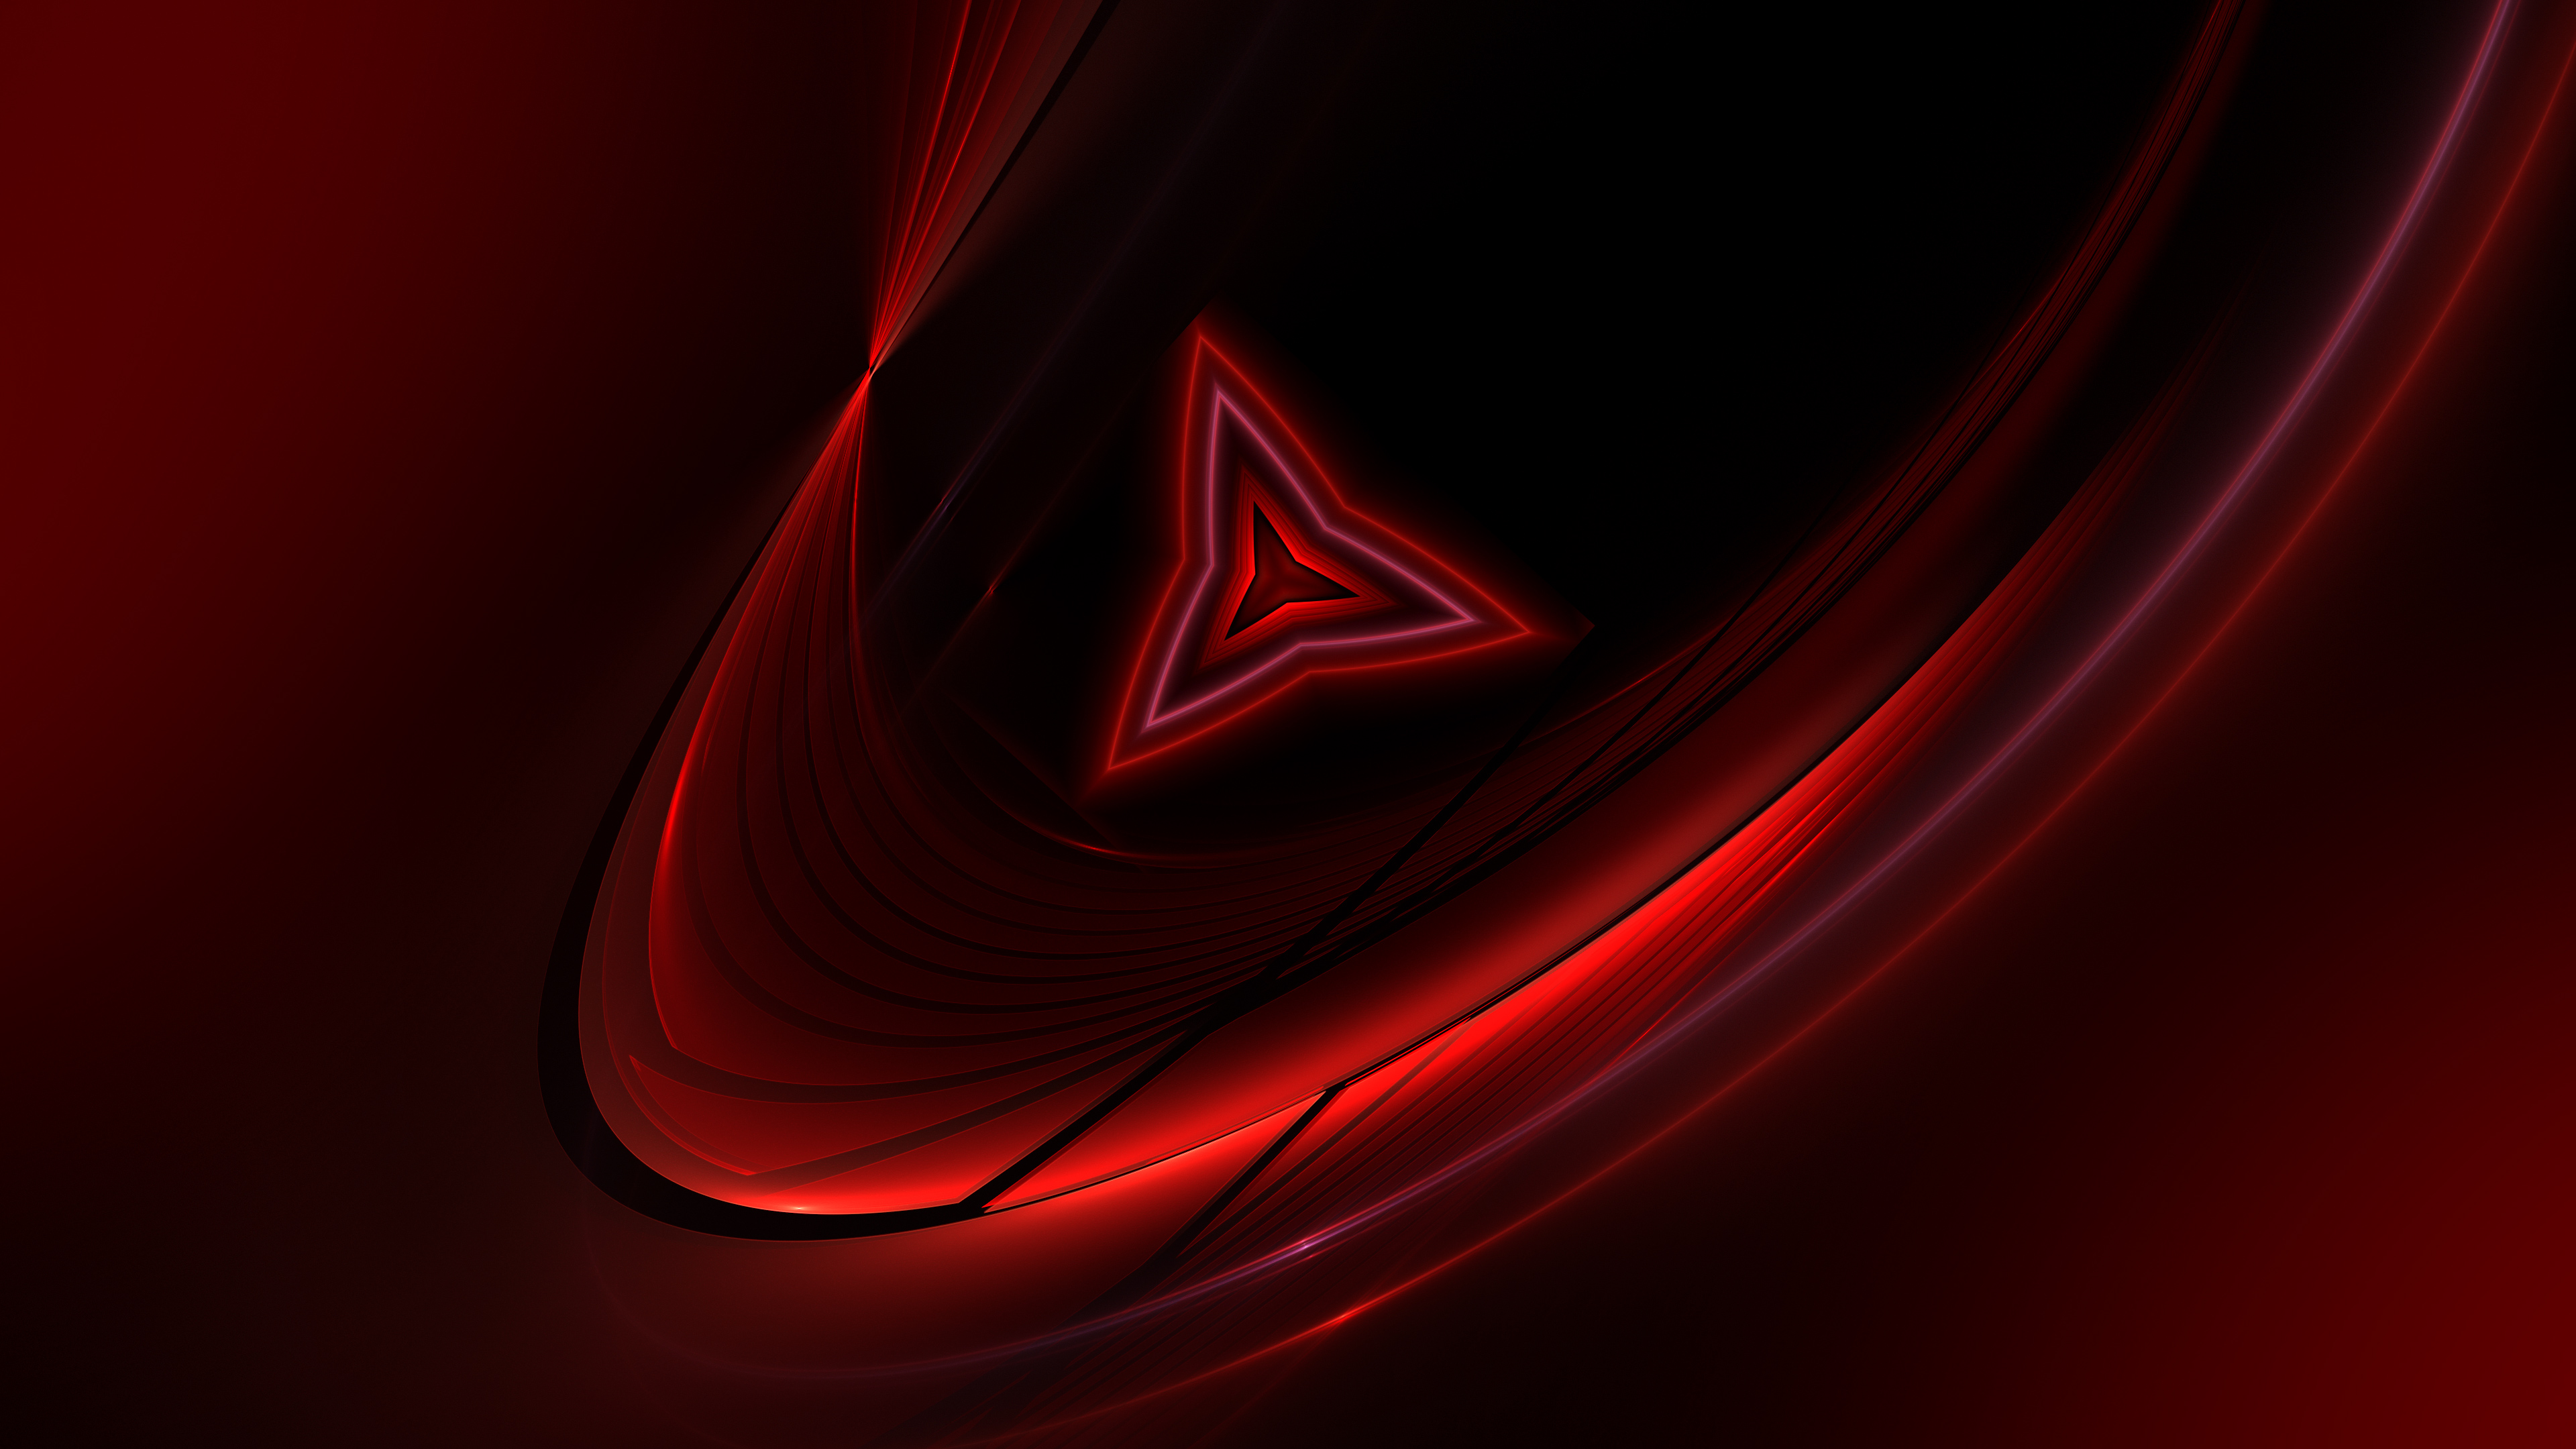 Artistic Red 3840x2160